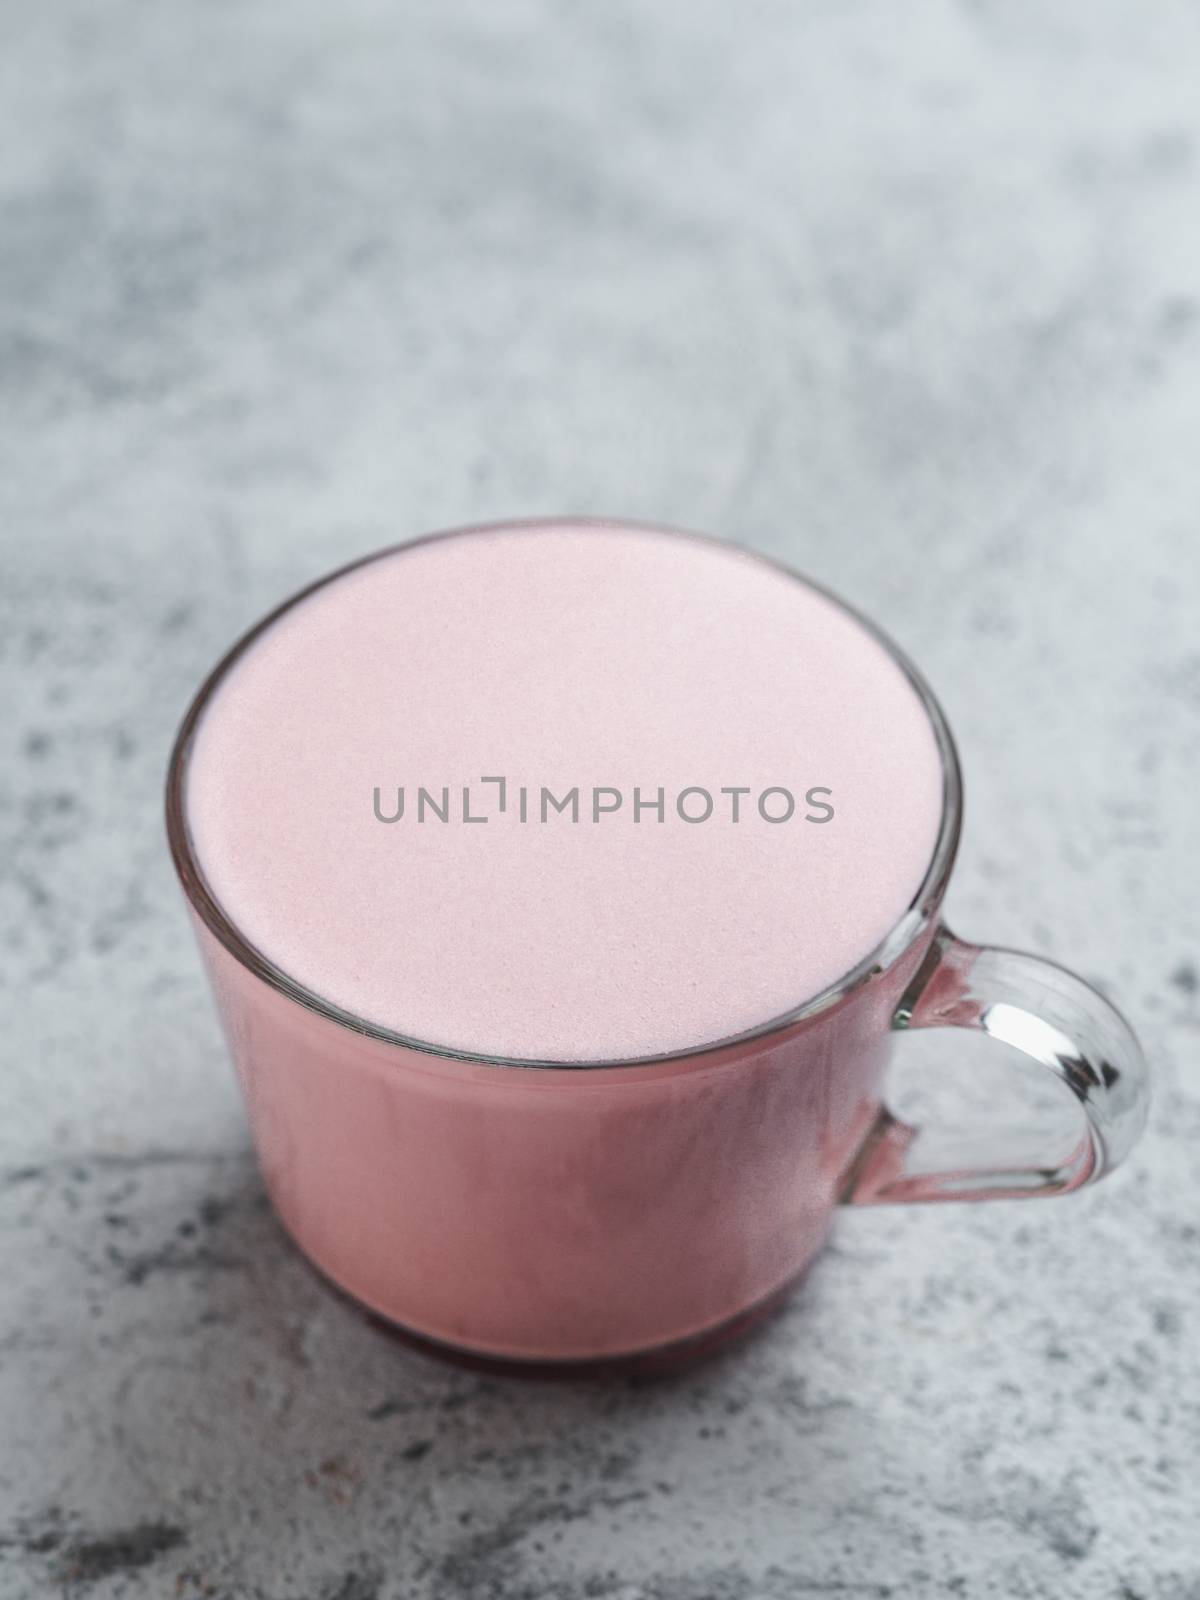 Trendy drink: pink latte. Beetroot or raspberry latte on gray cement background. Vertical. Copy space for text